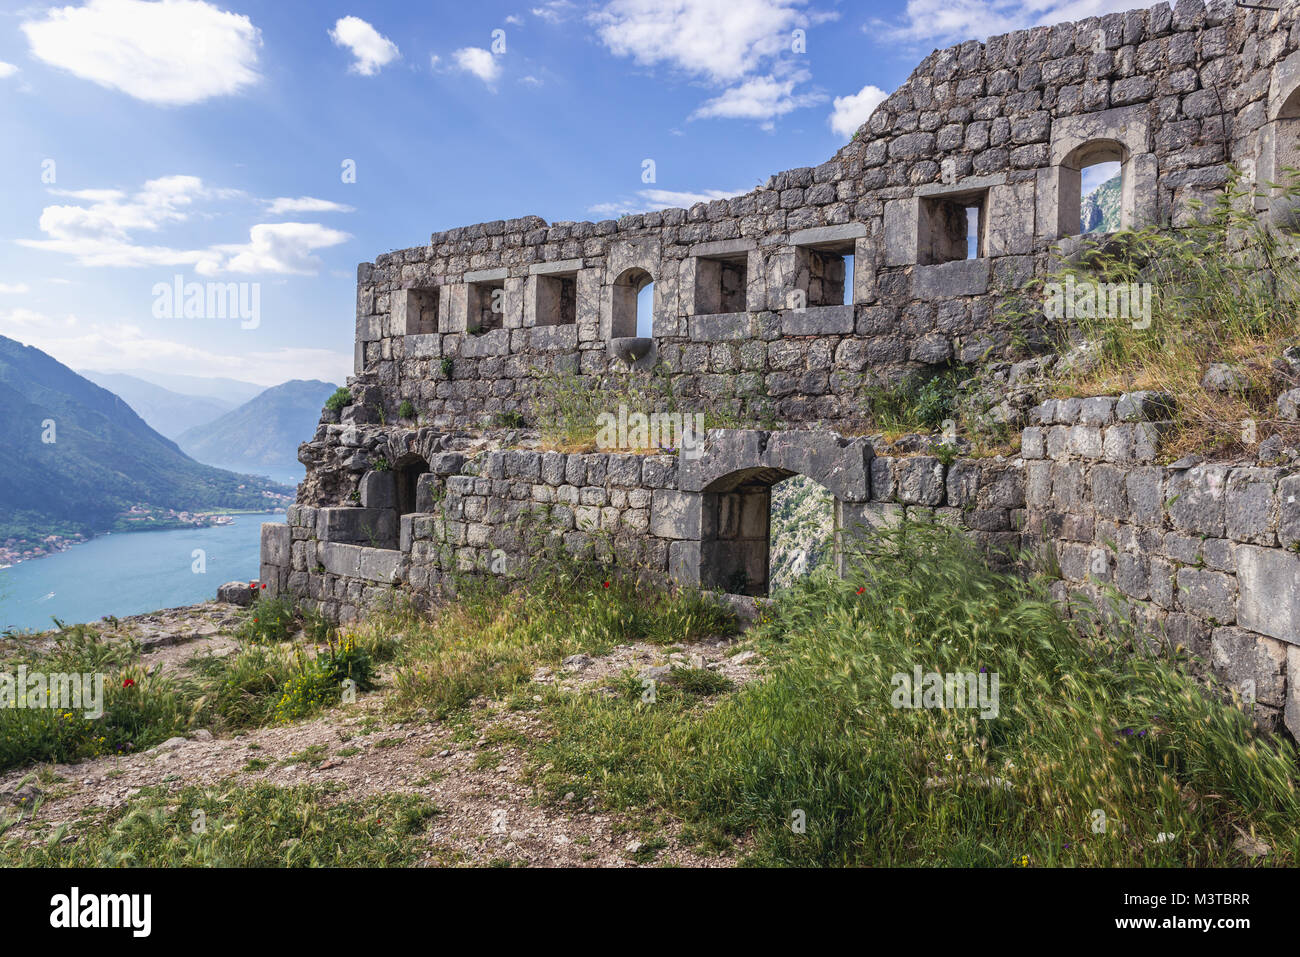 Remains of walls of Saint John Fortress on the mount aobve Kotor coastal city, located in Bay of Kotor of Adriatic Sea, Montenegro Stock Photo